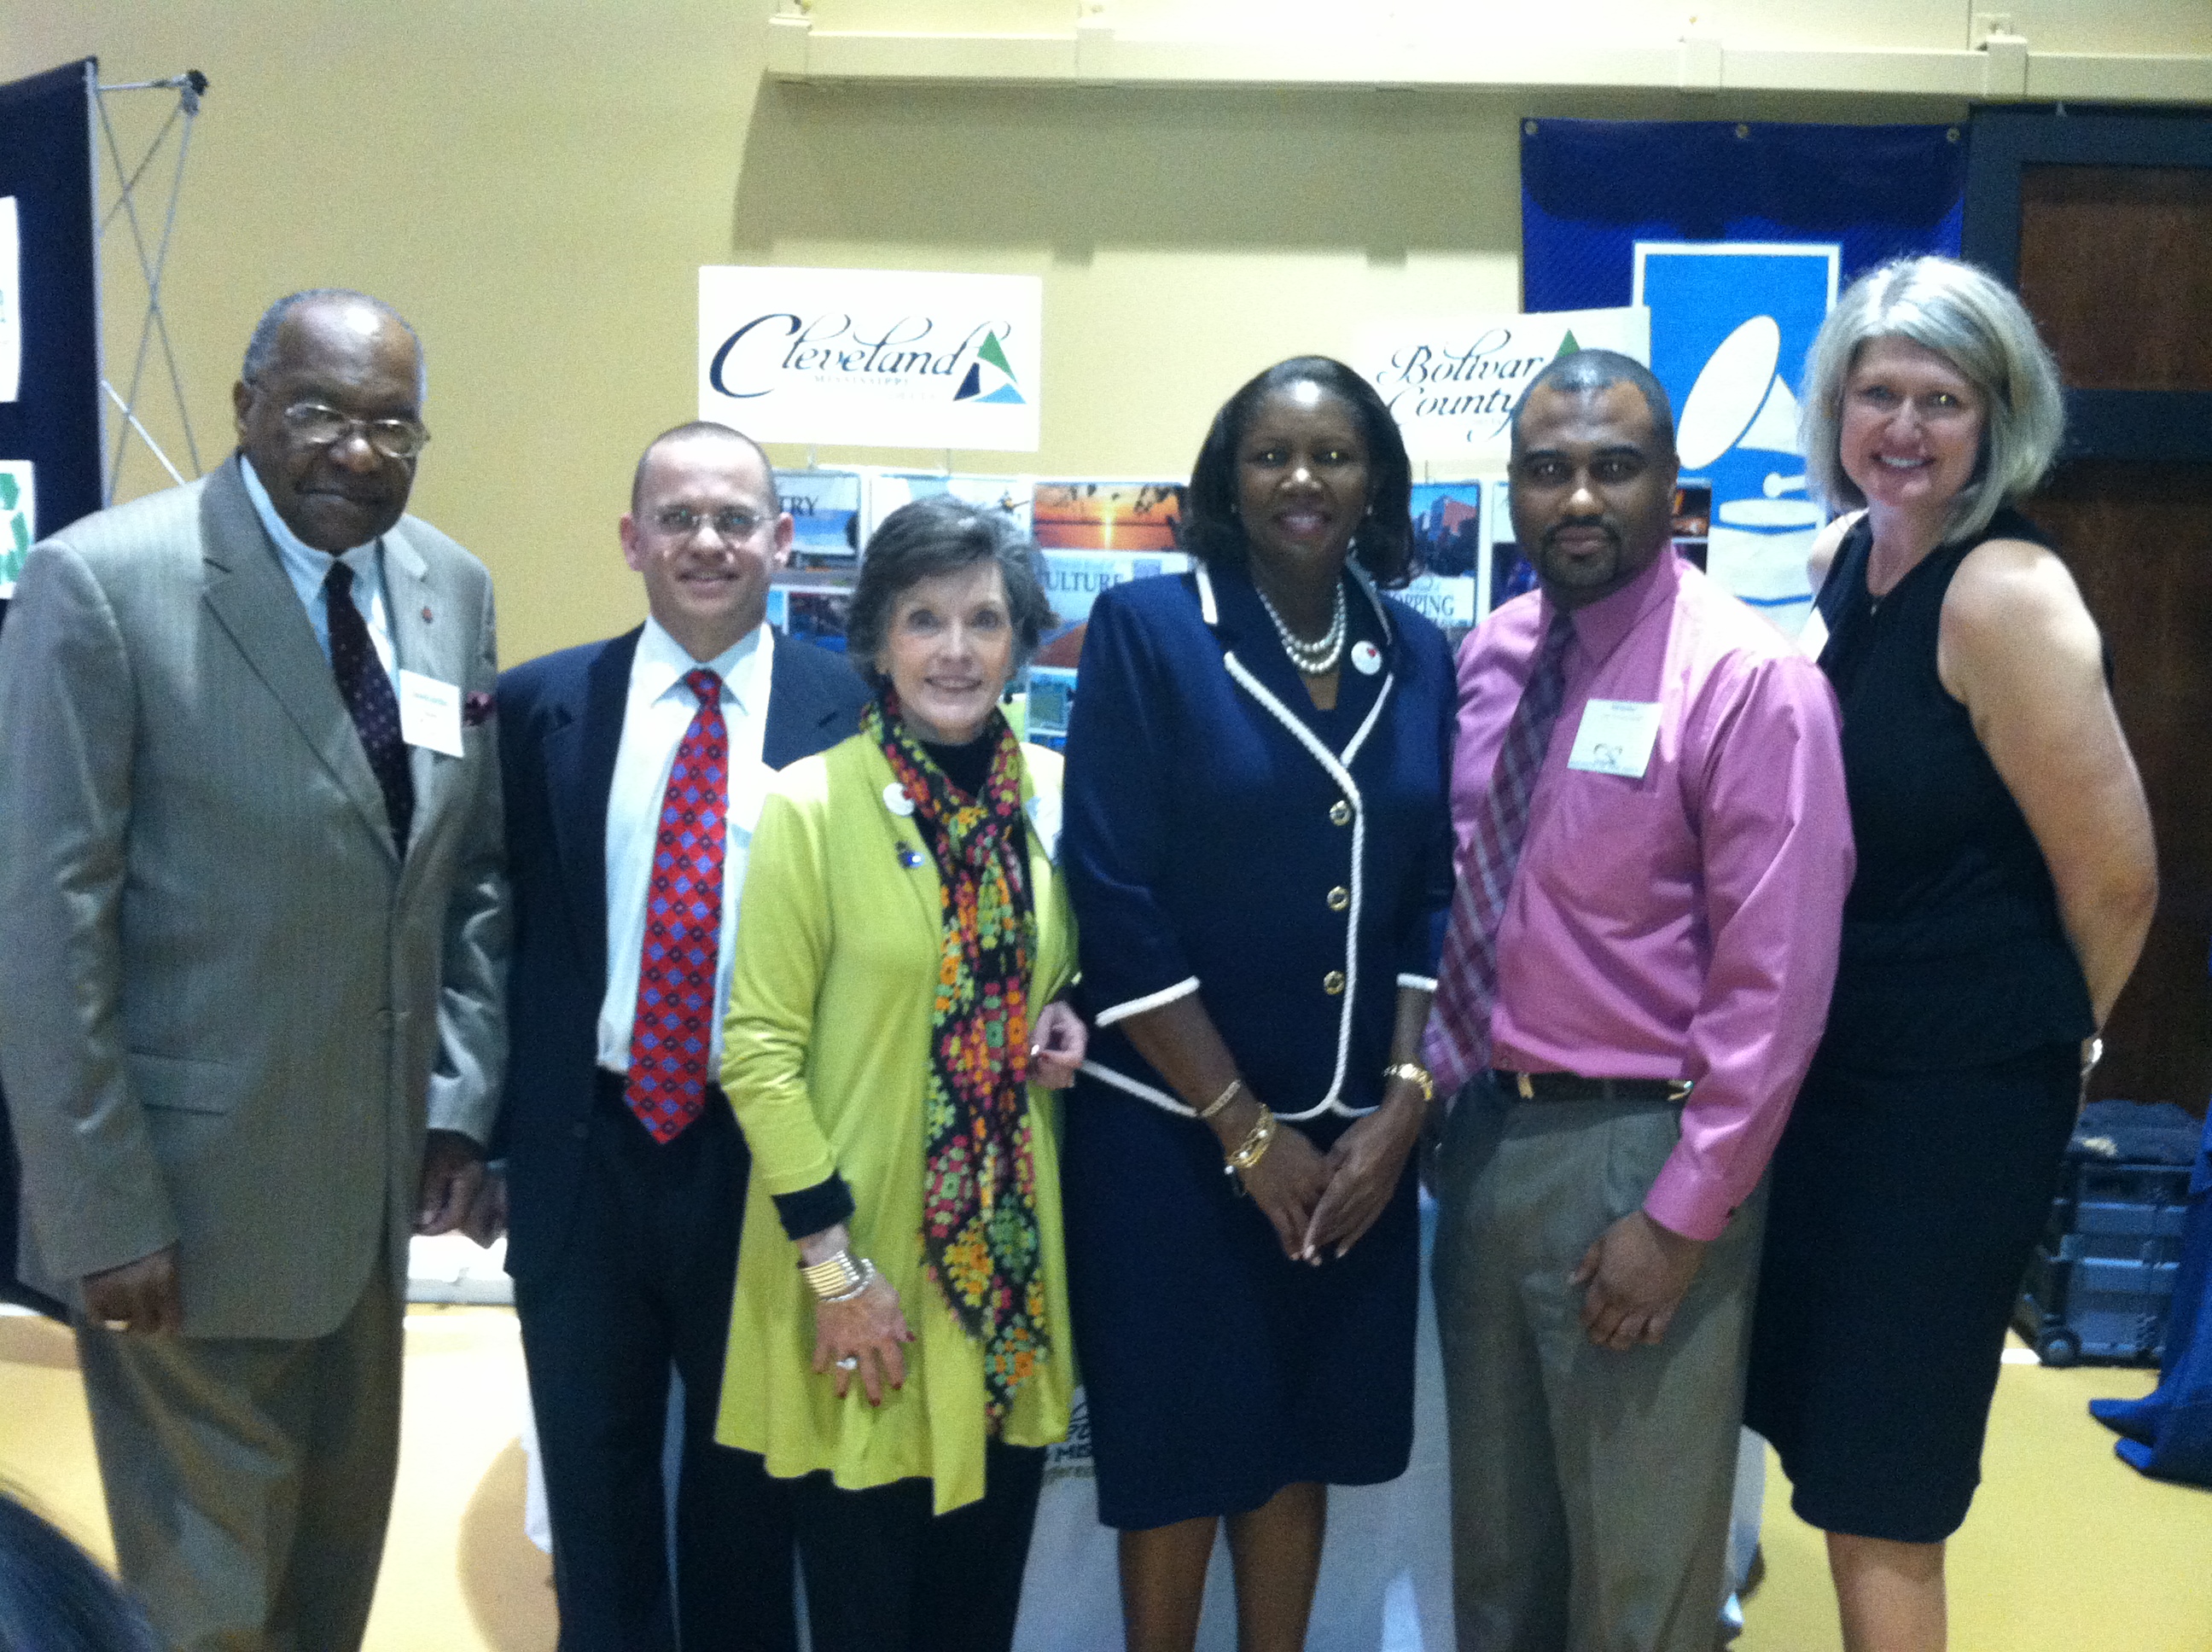 Photo:   Senator David Jordan; Aaron Lasker, president of the Cleveland/Bolivar County Chamber of Commerce: Lee Aylward, Delta Center for Culture and Learning, Delta State University; Representative Linda Coleman; Will Hooker, Bolivar County Administrator; and Heather Fuqua, Office manager, Cleveland/Bolivar County Chamber.